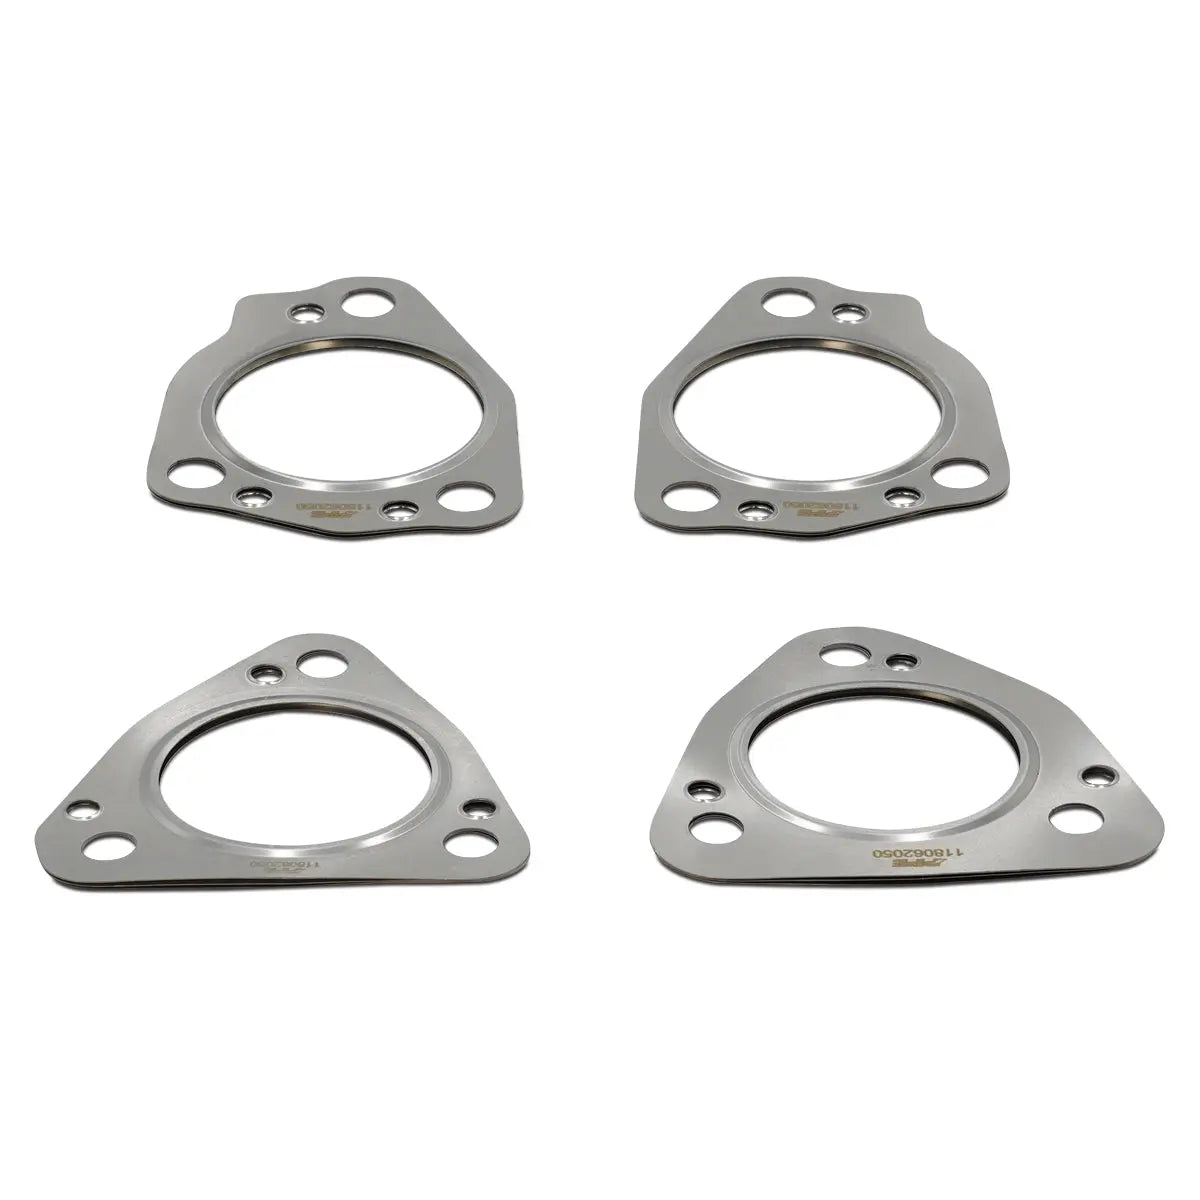 2017-2024 GM 6.6L Duramax Stainless-Steel Gasket Set for Duramax L5P Up-Pipes (4 pcs)